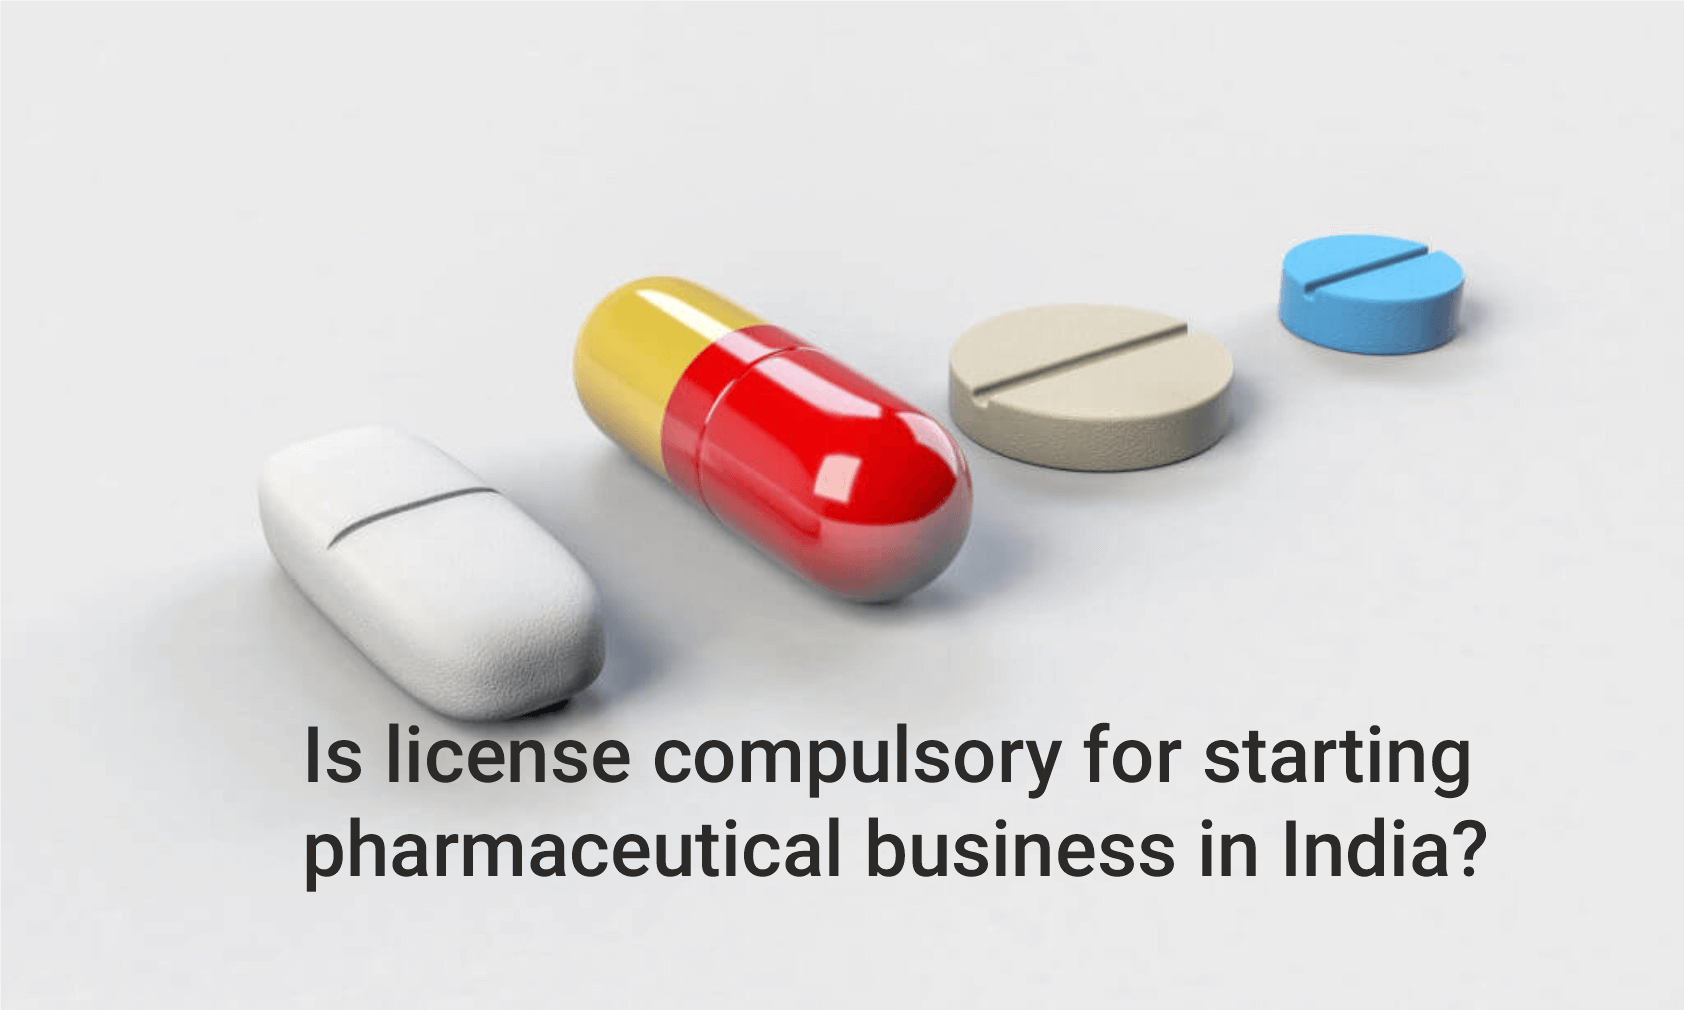 Is license compulsory for starting pharmaceutical business in India?